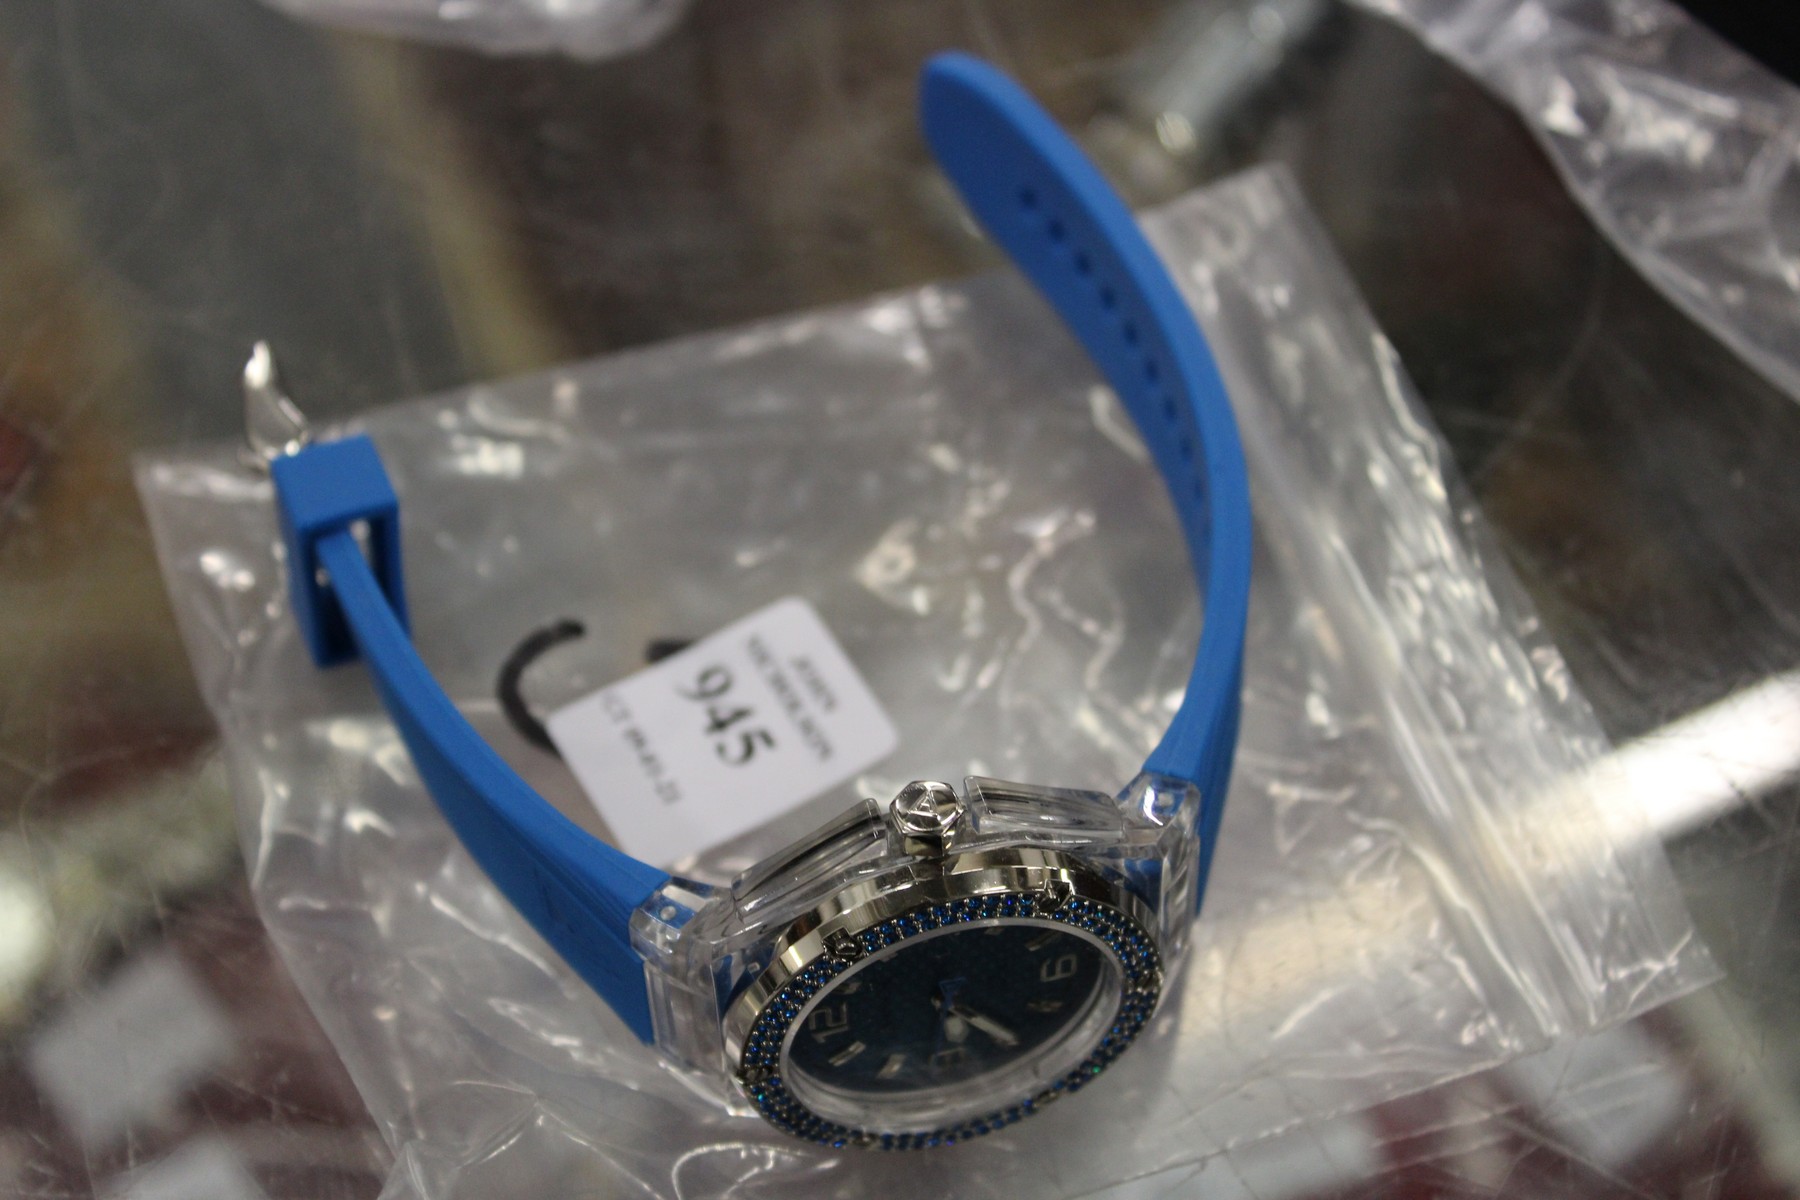 An Avalanche wristwatch. - Image 2 of 2